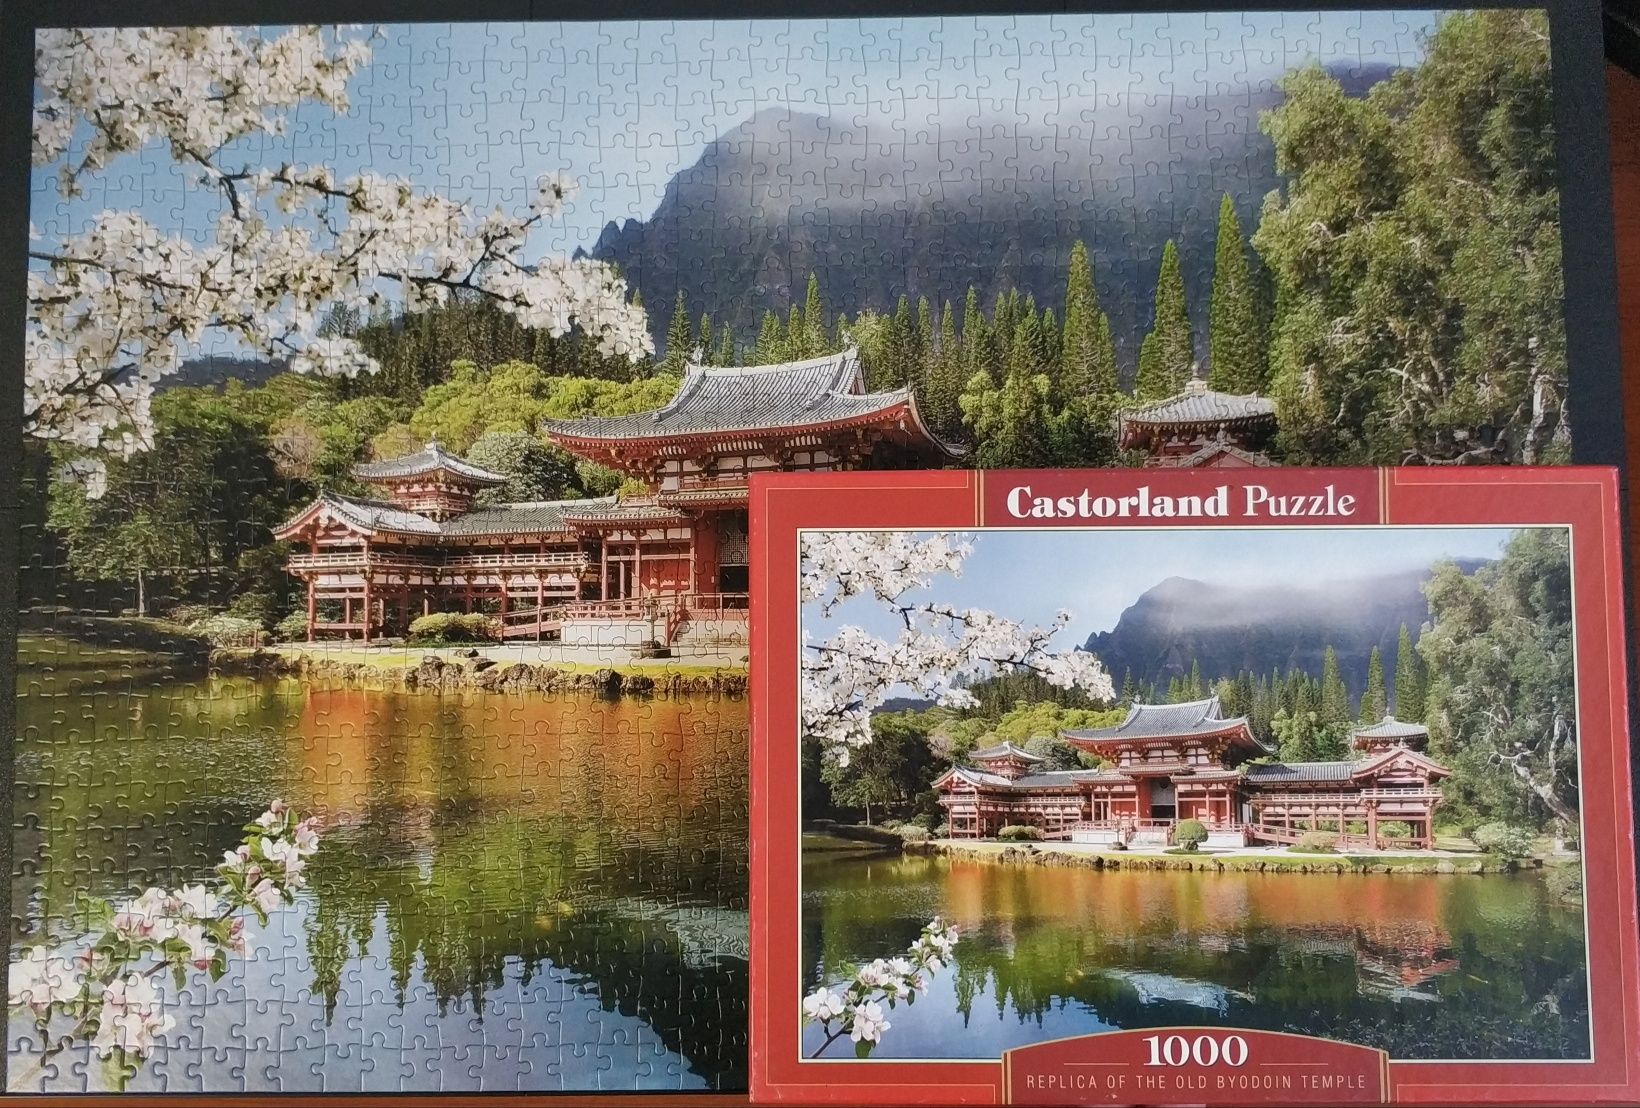 Puzzle Castorland 1000 Republica of the Old Byodoin Temple